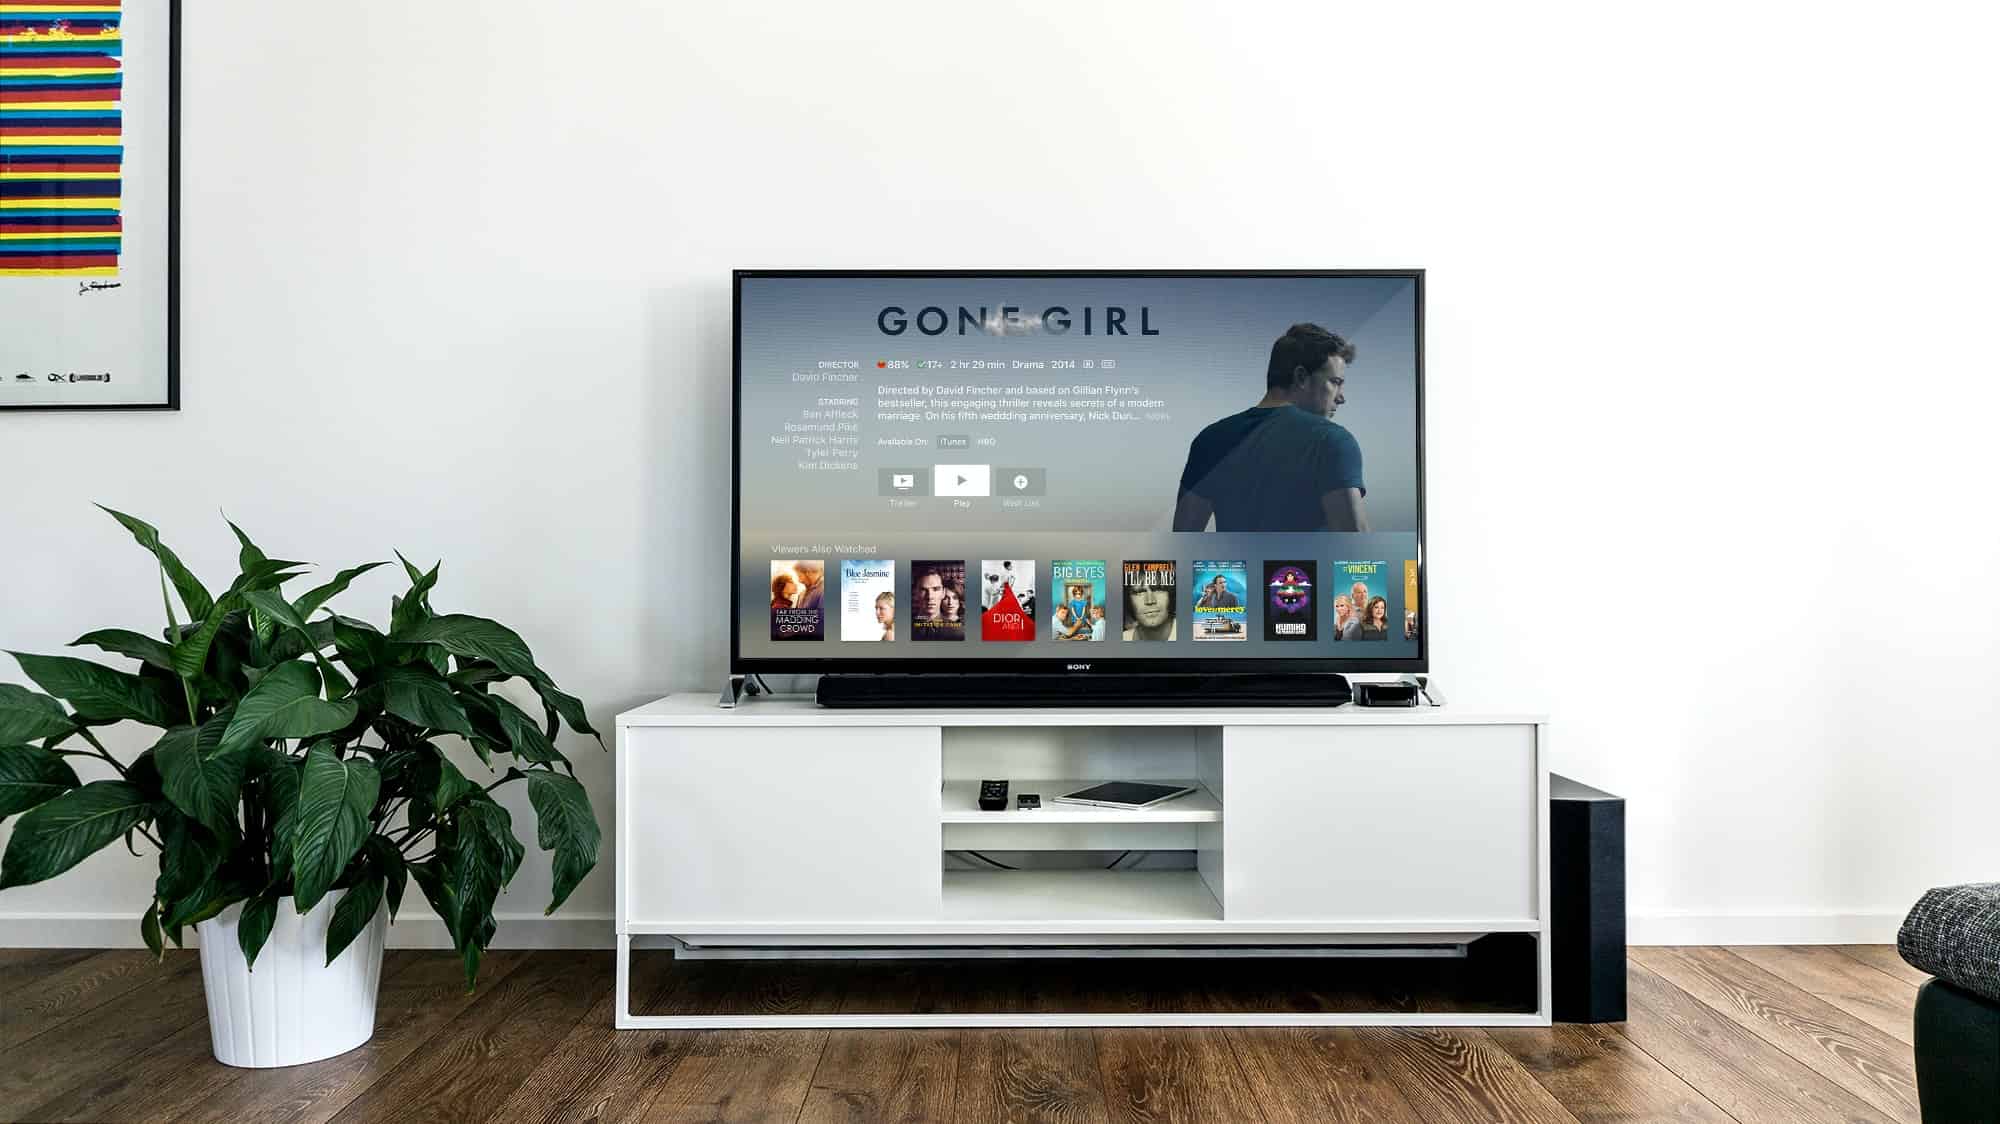 How Do You Stop a Movie on Apple TV?